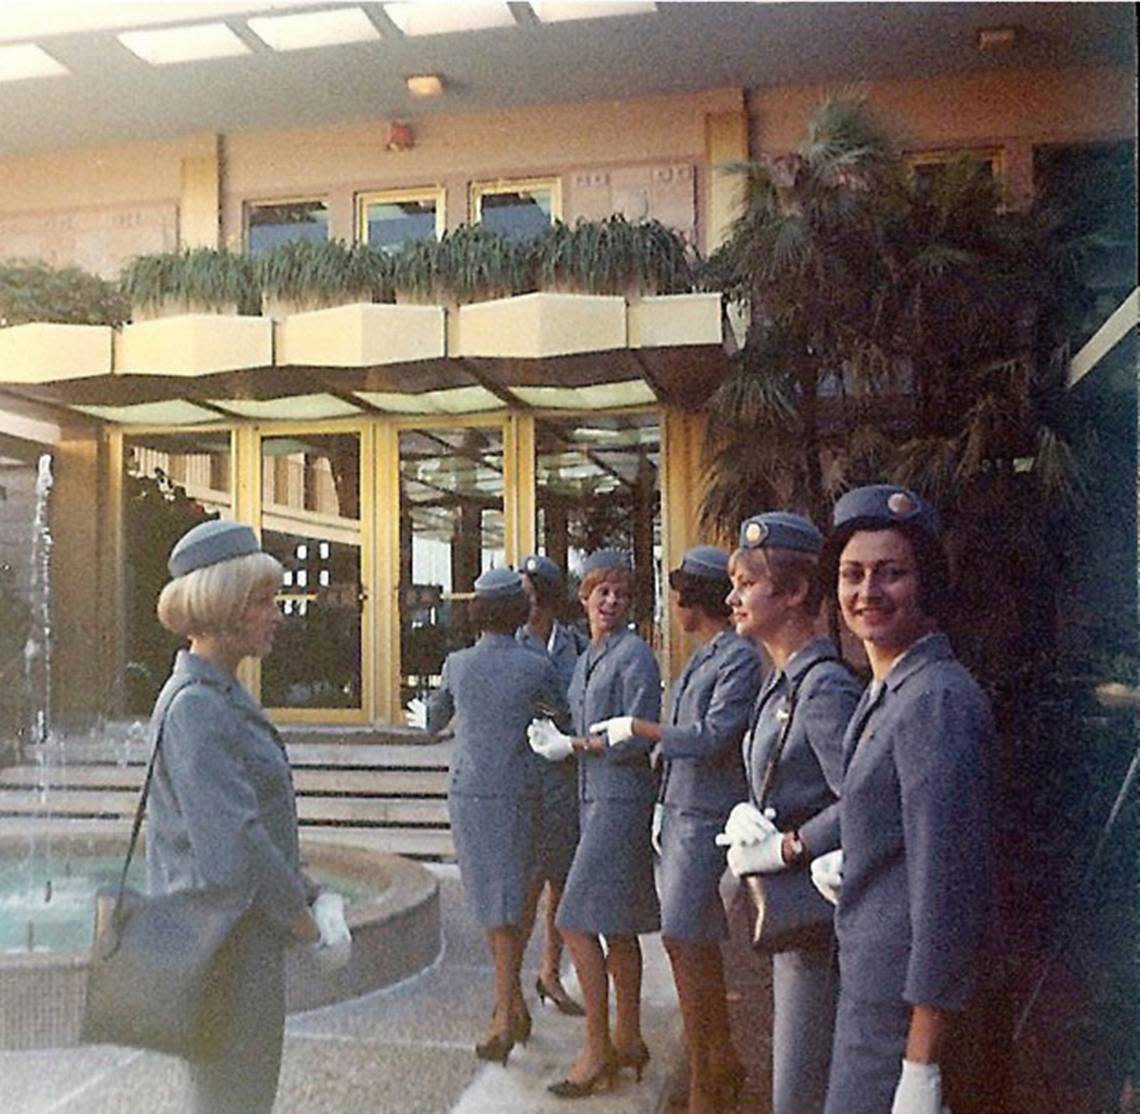 Flight attendants shown in 1968 at their graduation in the central courtyard of the Pan American Airways regional headquarters building at Miami International Airport.